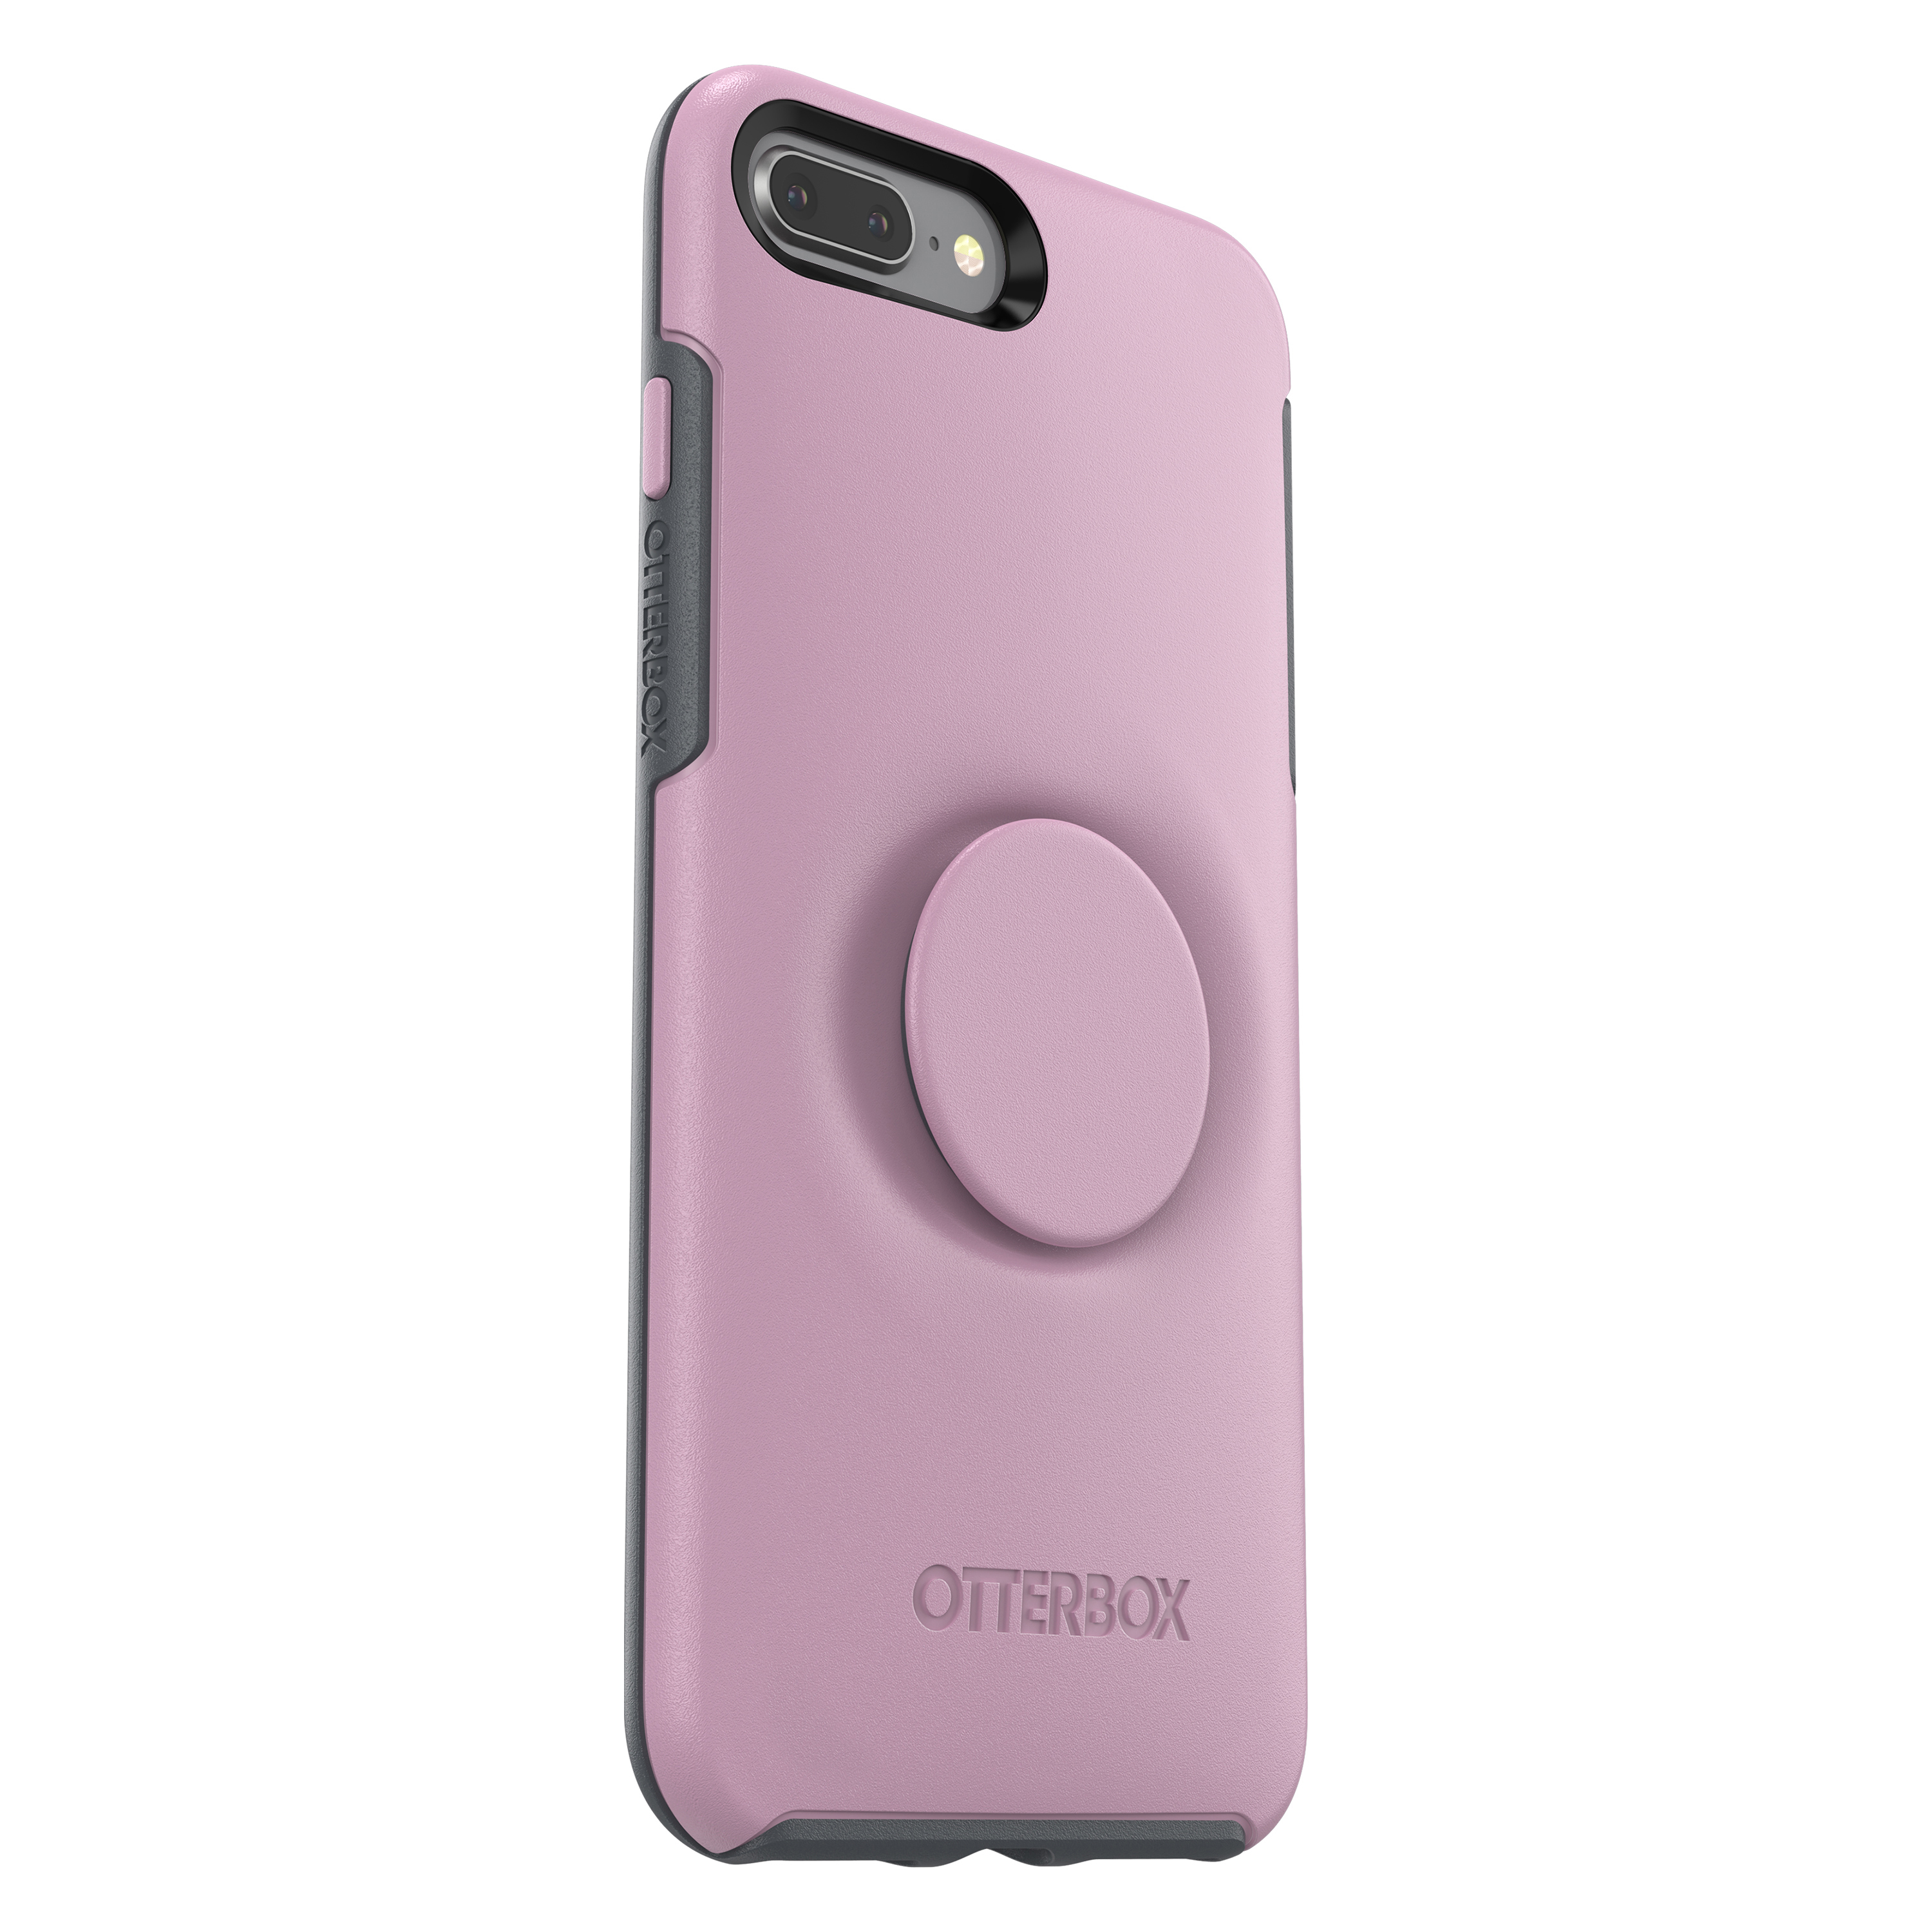 Plus, Pink Apple, Otter Backcover, Plus, Symmetry, 8 iPhone 7 + OTTERBOX iPhone Pop